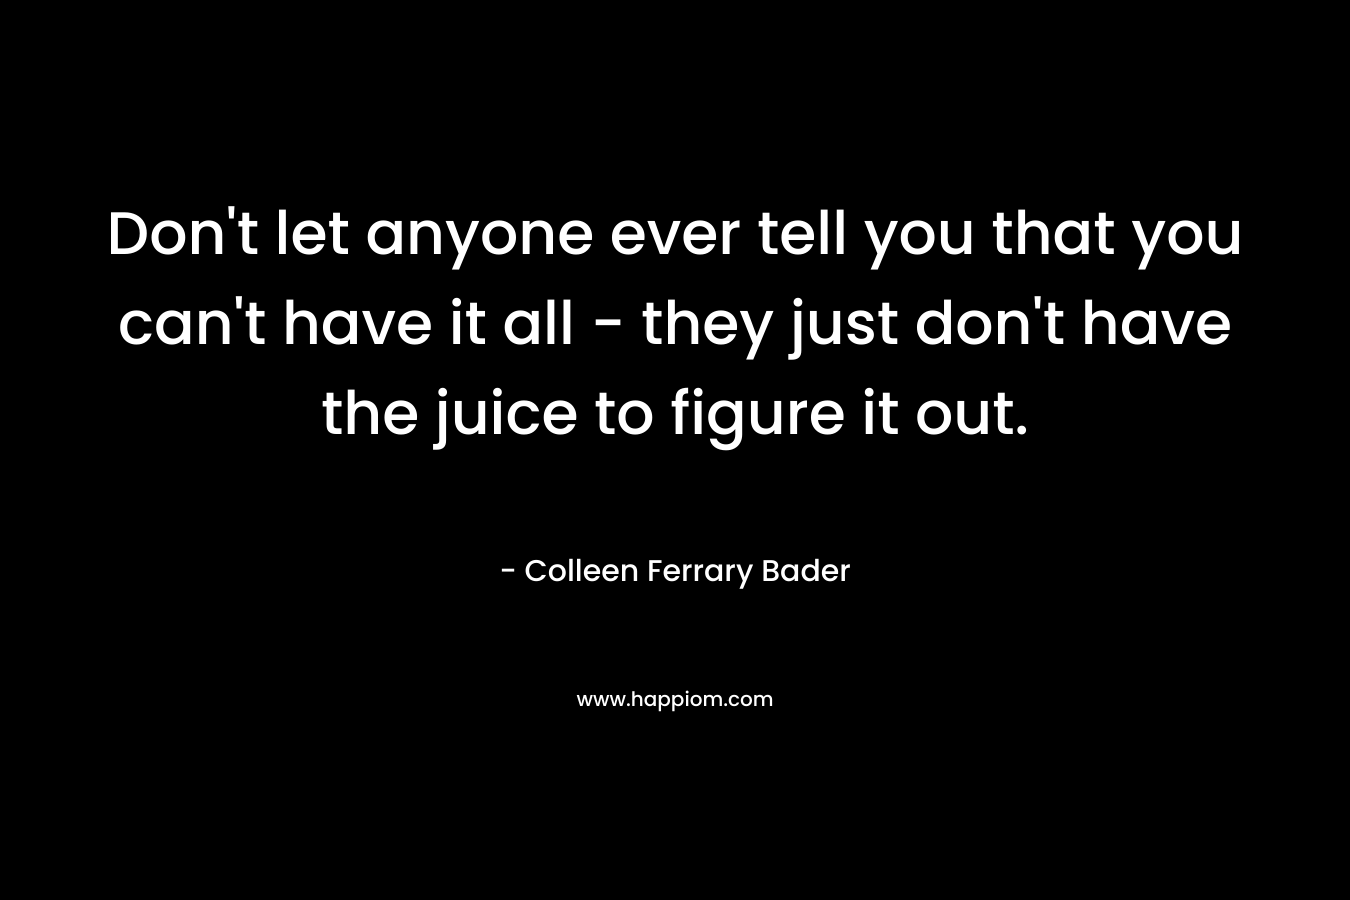 Don’t let anyone ever tell you that you can’t have it all – they just don’t have the juice to figure it out. – Colleen Ferrary Bader